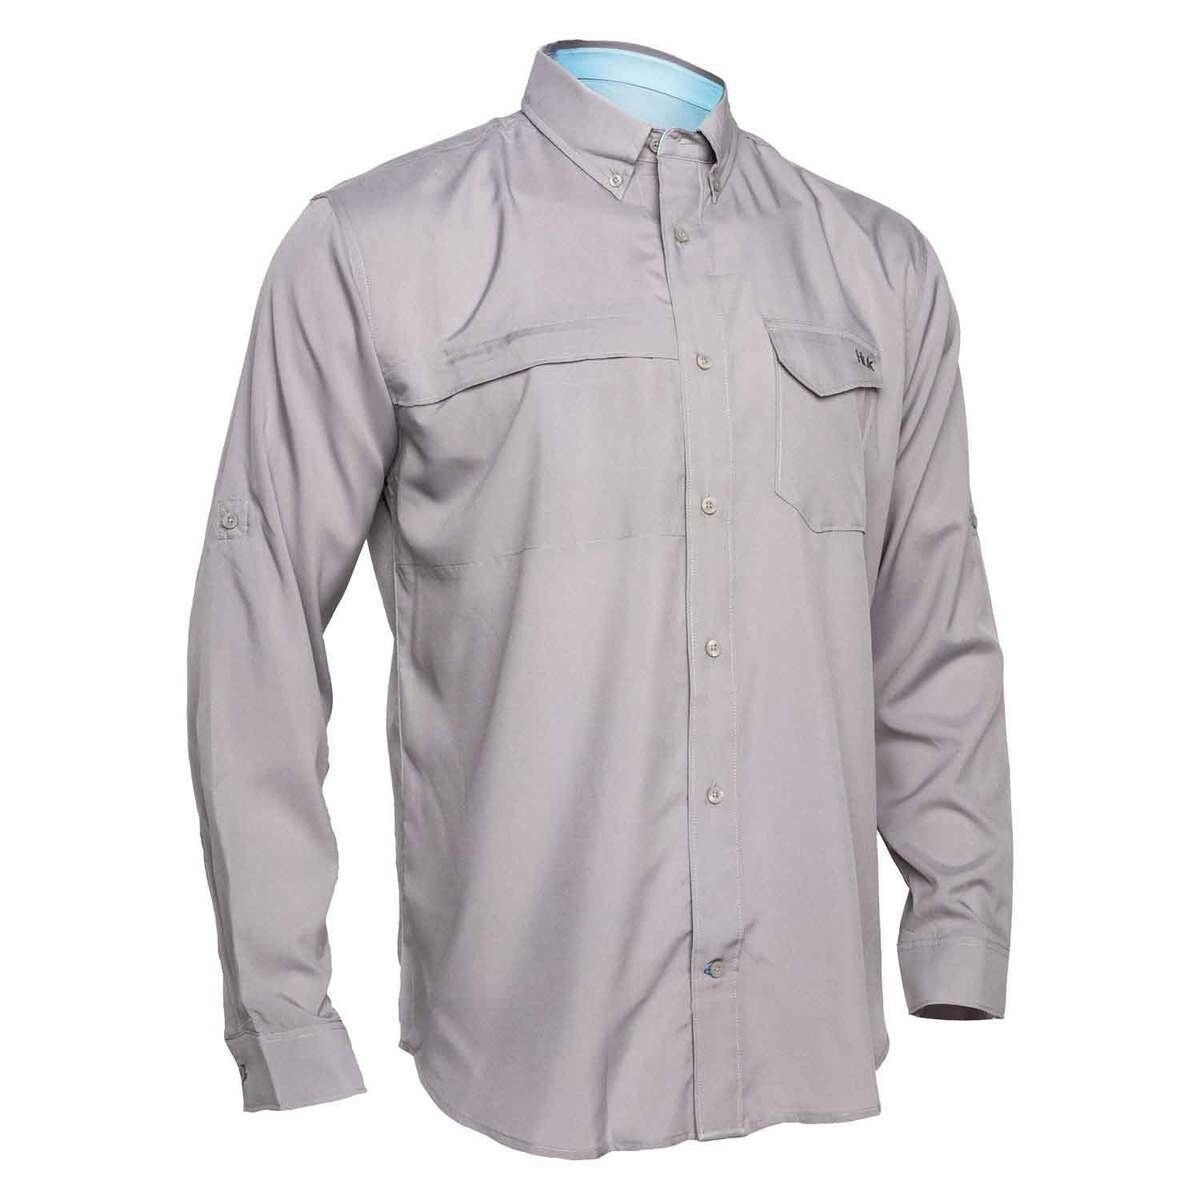 Huk Tide Point Solid Long Sleeve Button-Down Shirt, Color: Grey, Size: M